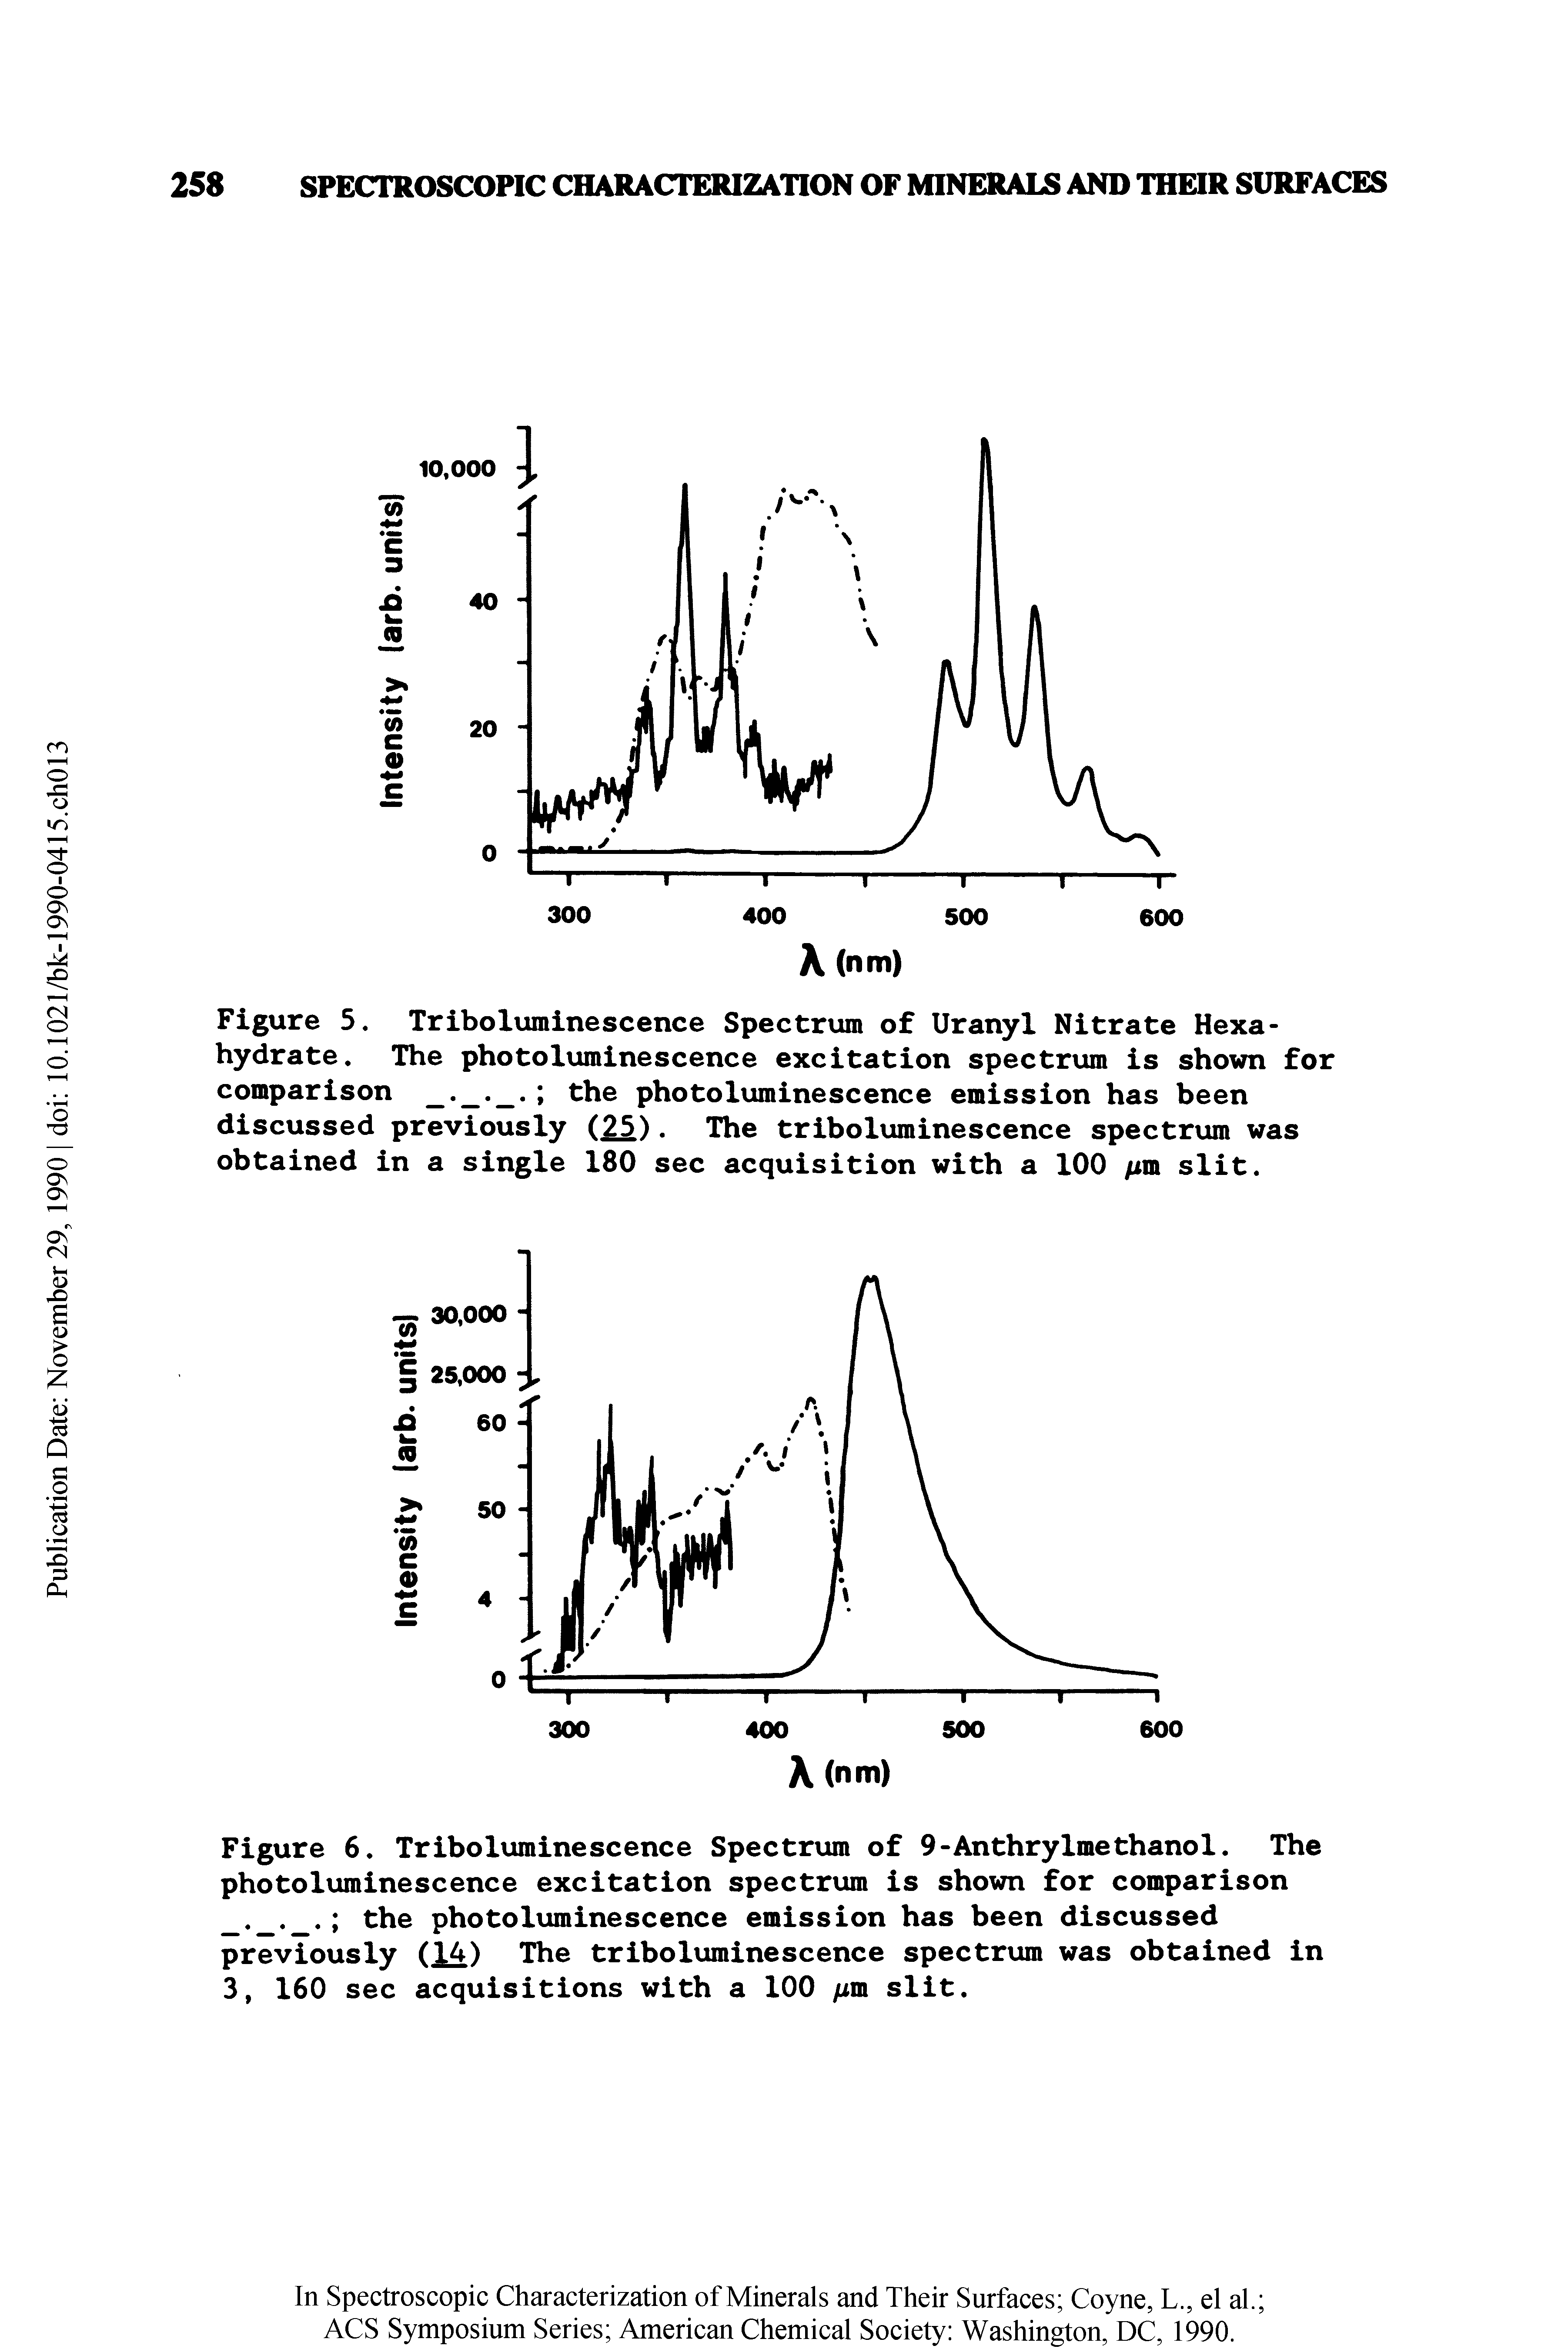 Figure 5. Triboluminescence Spectrum of Uranyl Nitrate Hexa-hydrate. The photoluminescence excitation spectrum is shown for comparison the photoluminescence emission has been...